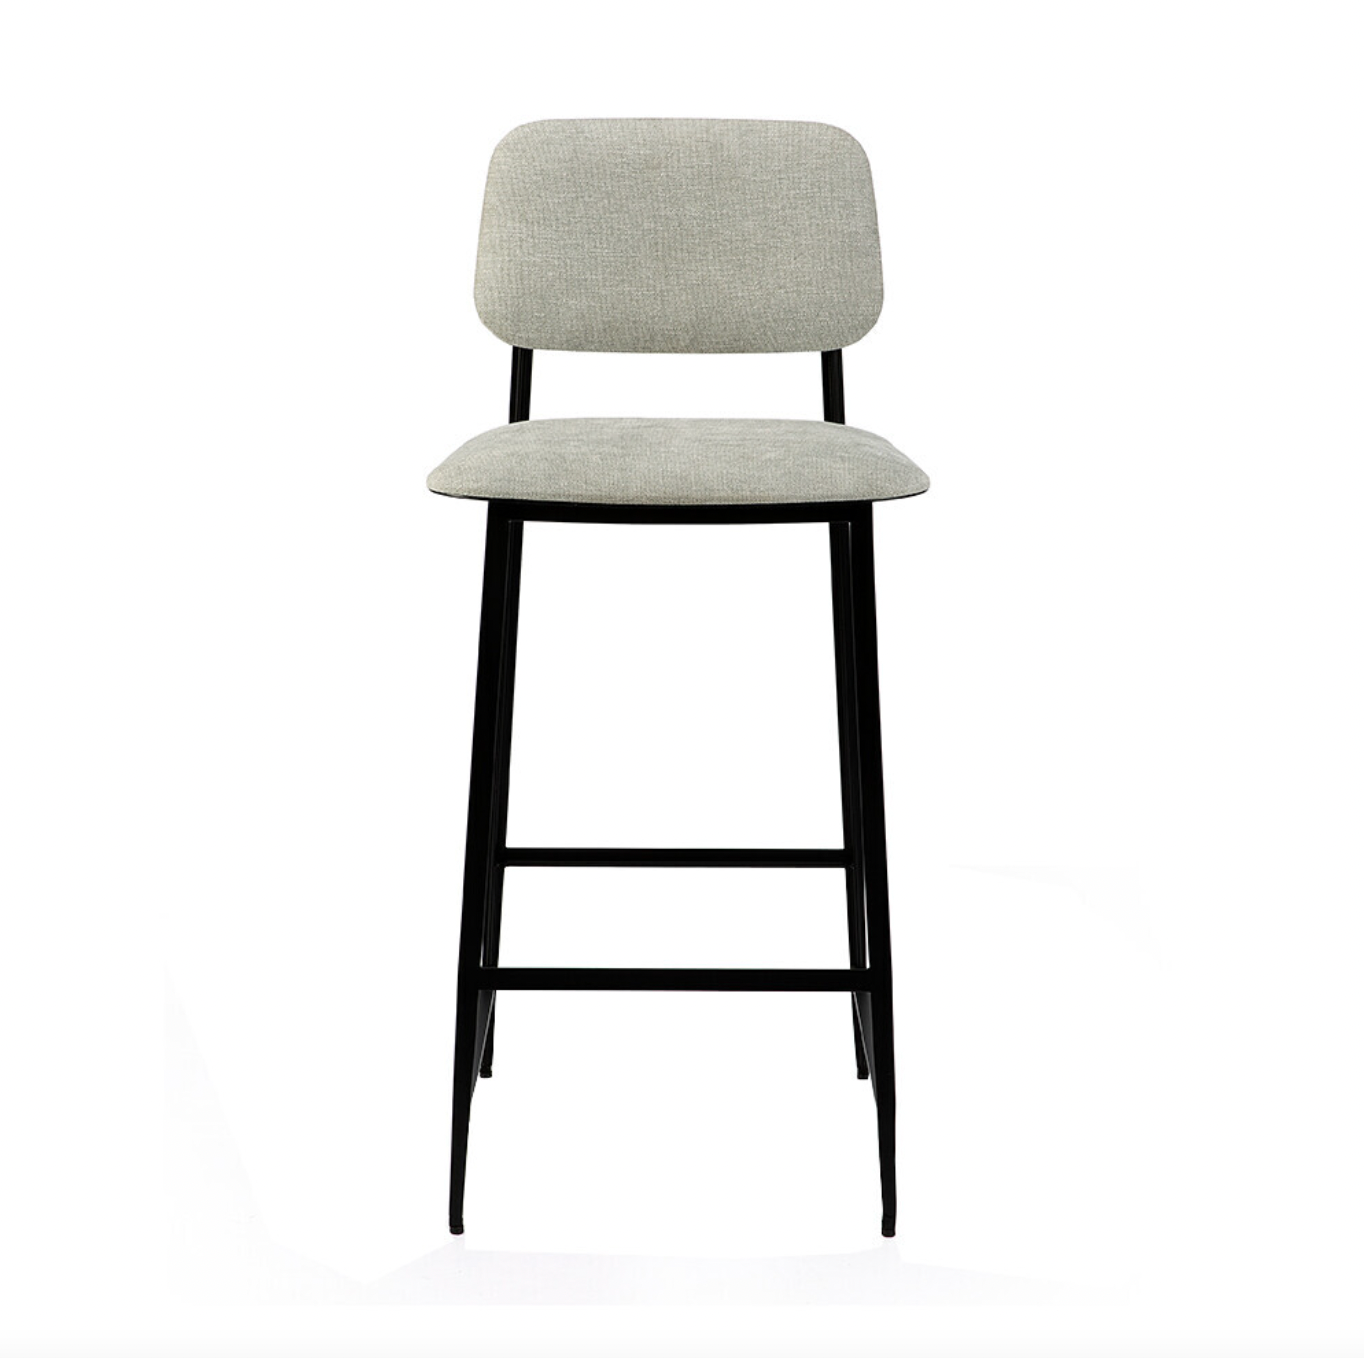 We love the thin, black metal frame paired with the light grey upholstery of this DC Counter Stool - Light Grey. Designed by Djordje Cukanovic, these brings a sleek, modern look to any kitchen or bar area.  Dimensions: 17"w x 19"d x 37.5"h 